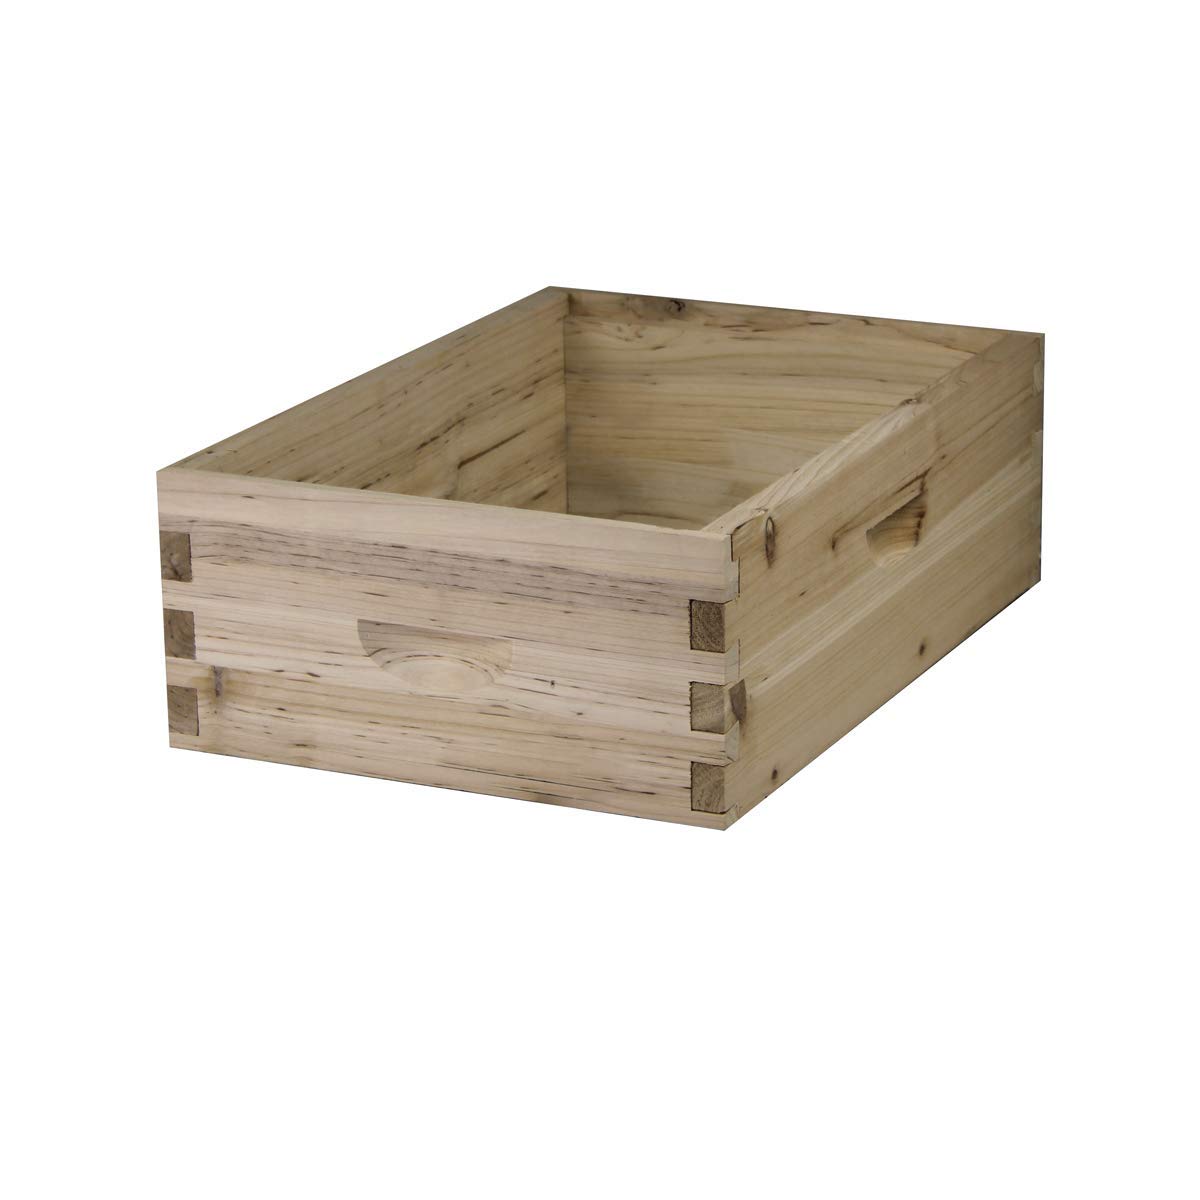 8 Frame Medium Super Box w/ Dovetail Joints (Unassembled w/ Frames and Foundations)